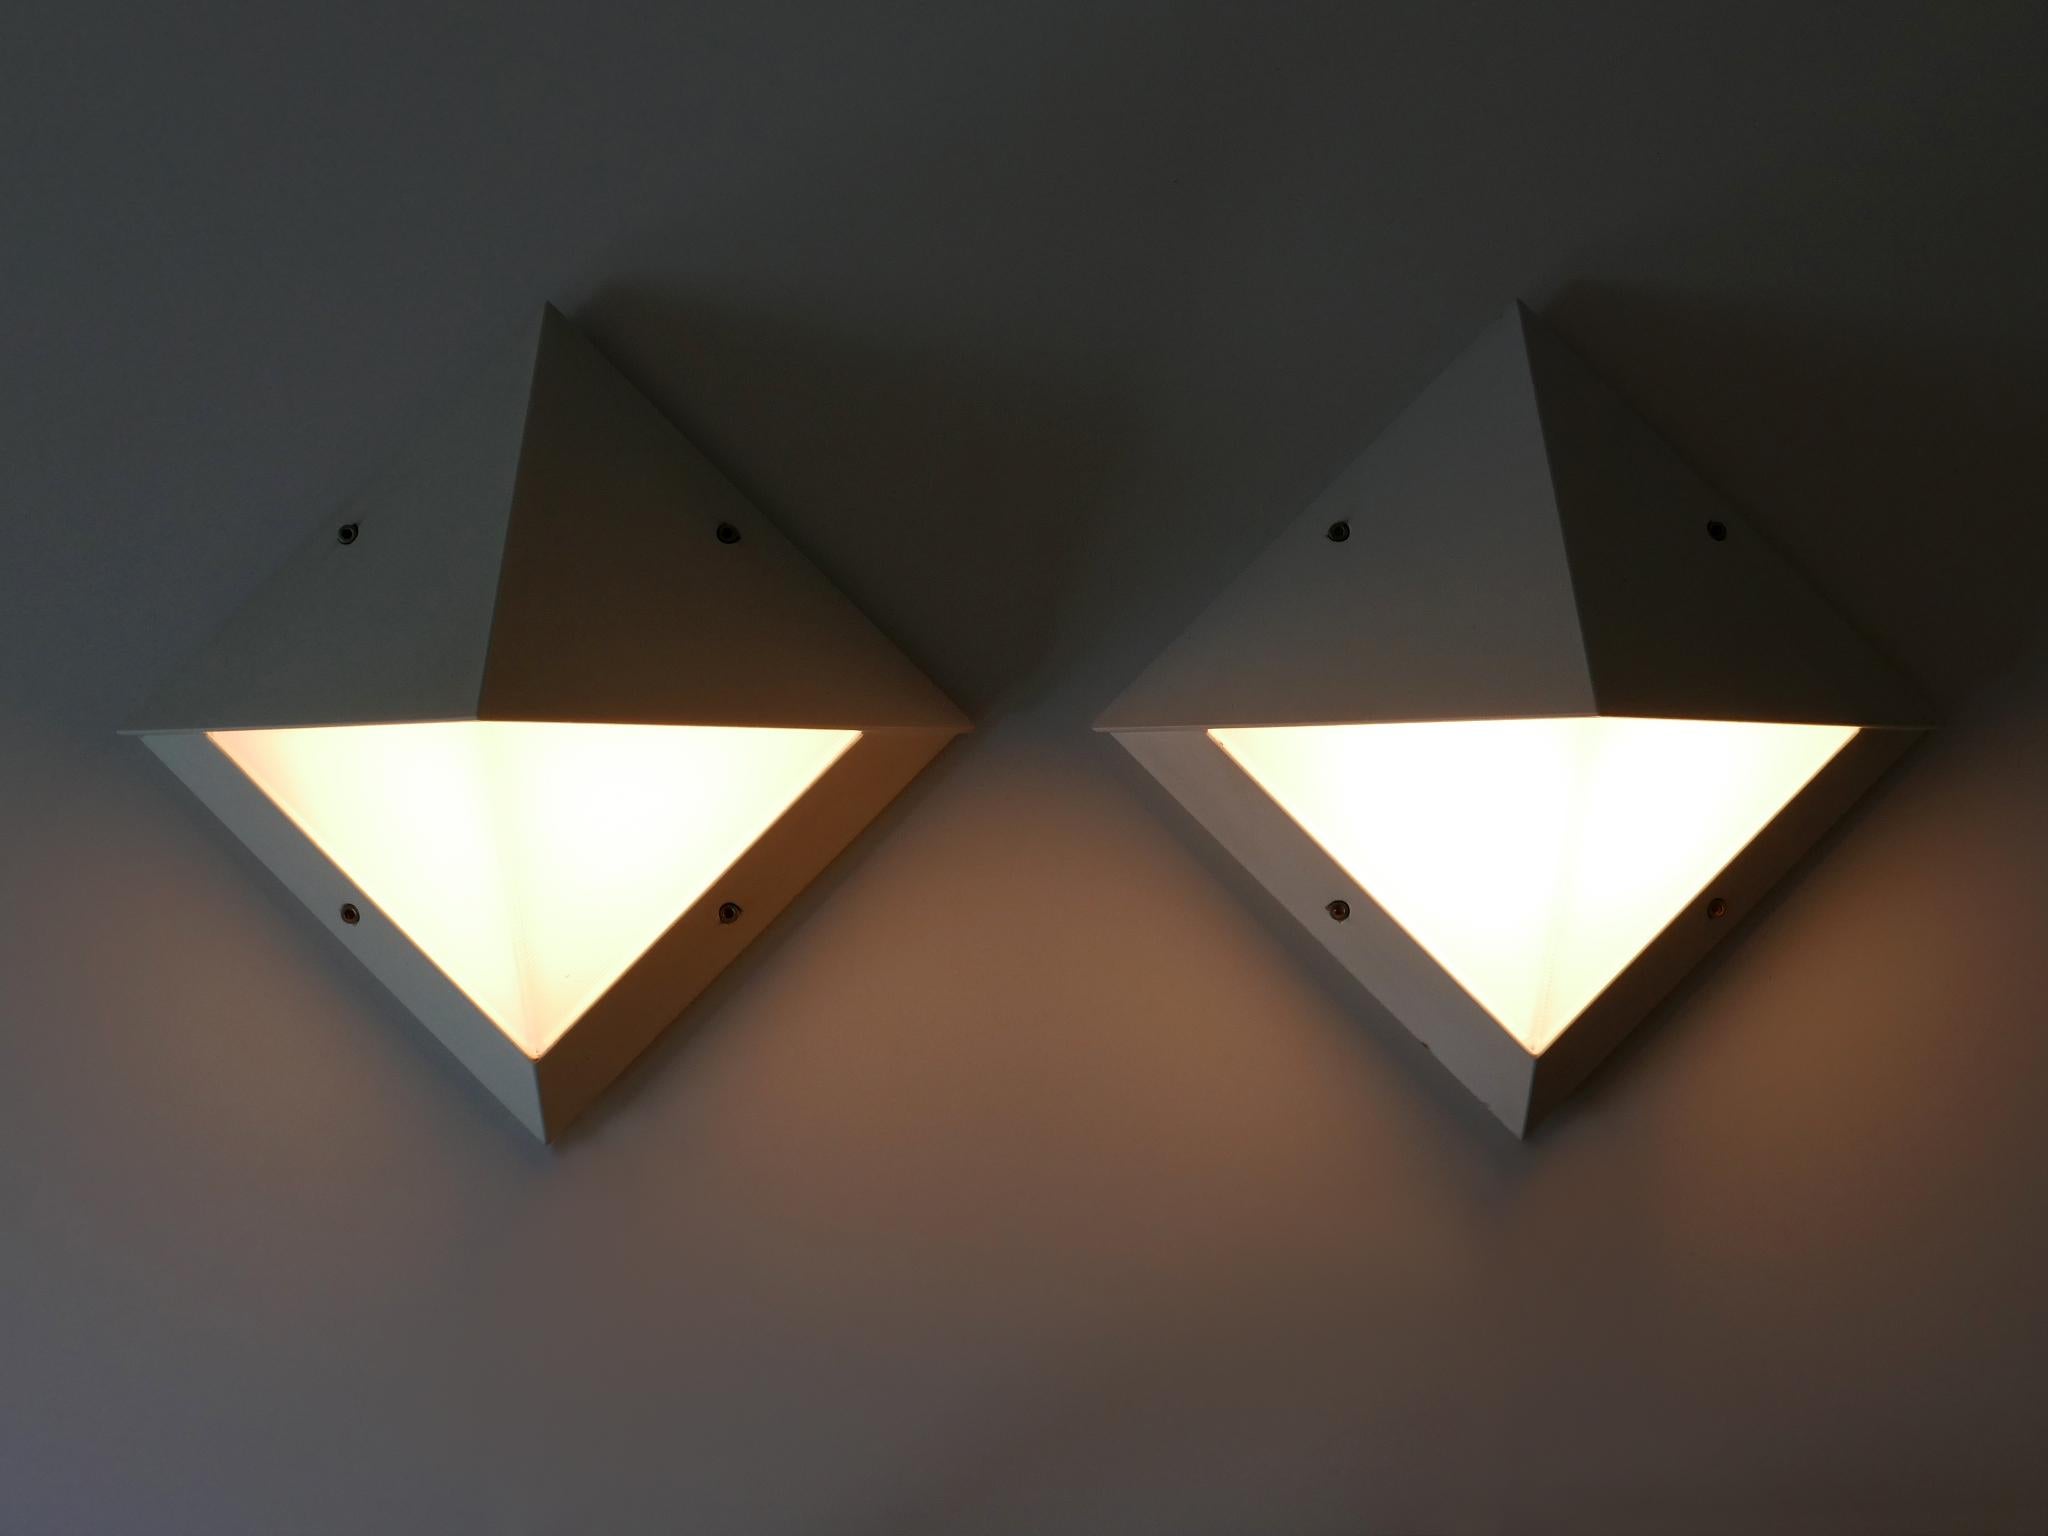 Set of two elegant modernist outdoor wall lamps or sconces. Designed & manufactured by BEGA, Germany, 1980s.

A total of four pairs of this size are available!

Executed in white enameled cast aluminium and glass, each lamp needs 1 x E27 / E26